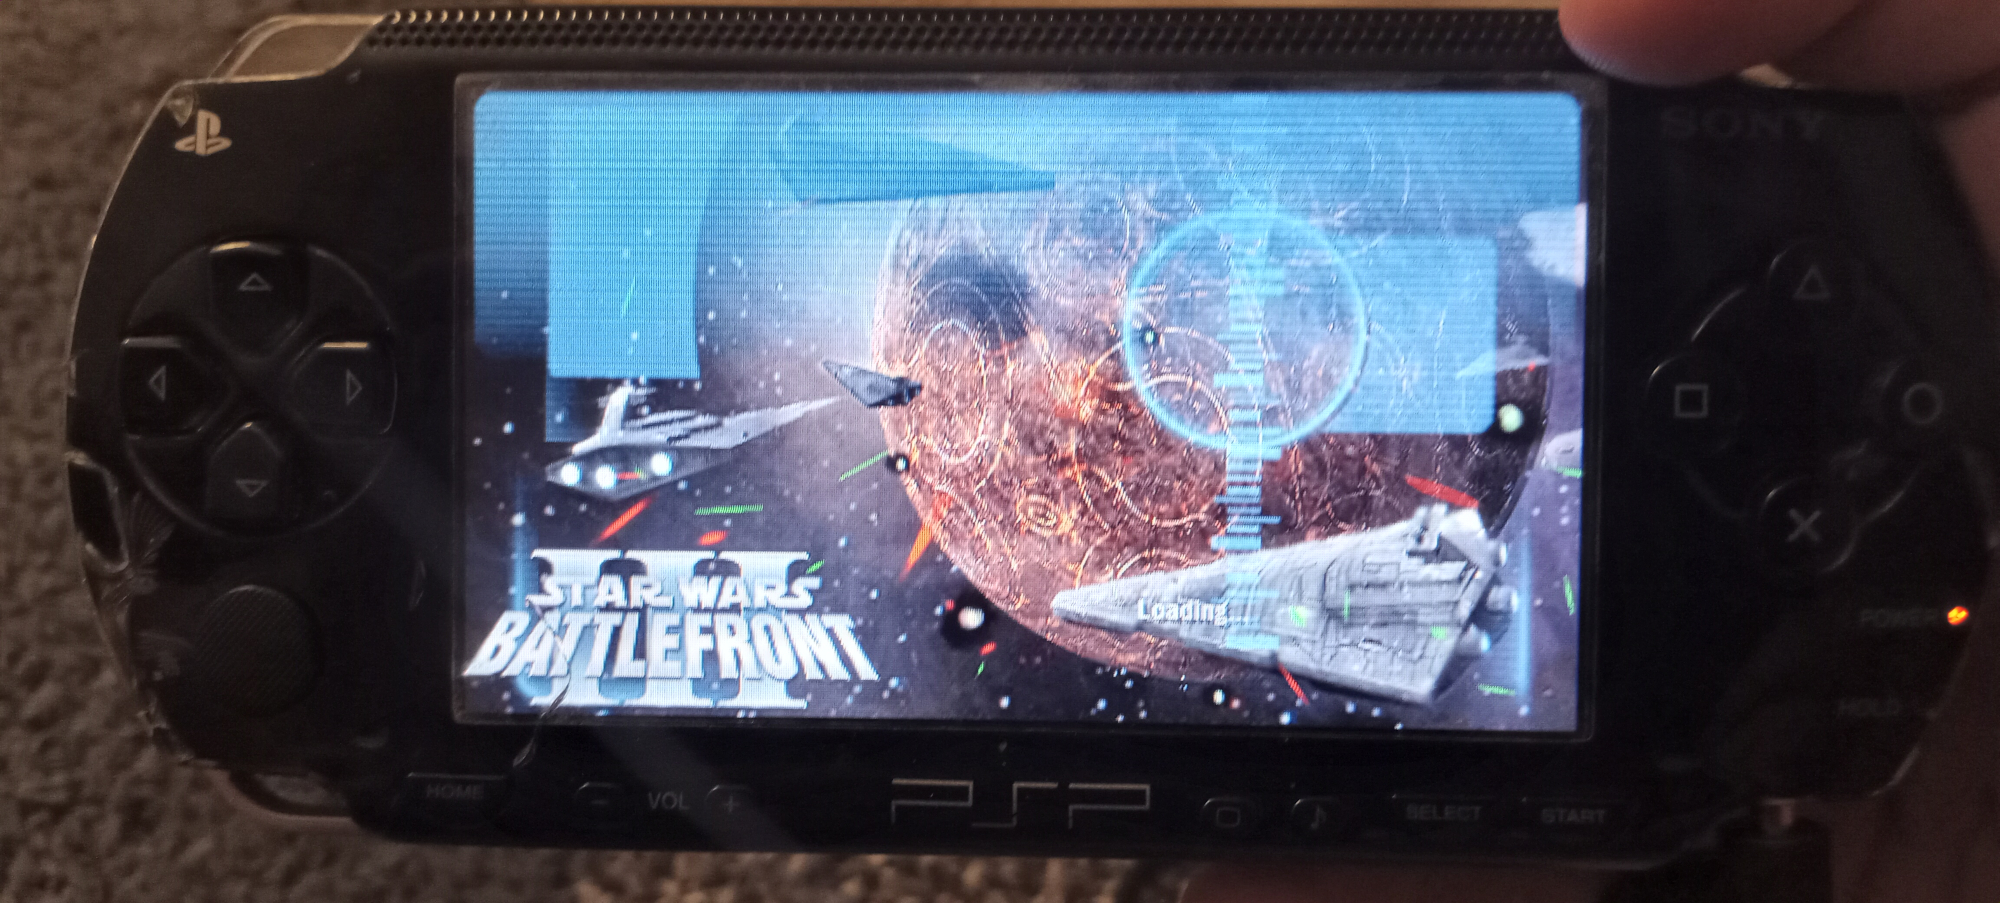 The loading screen of Star Wars: Battlefront 3